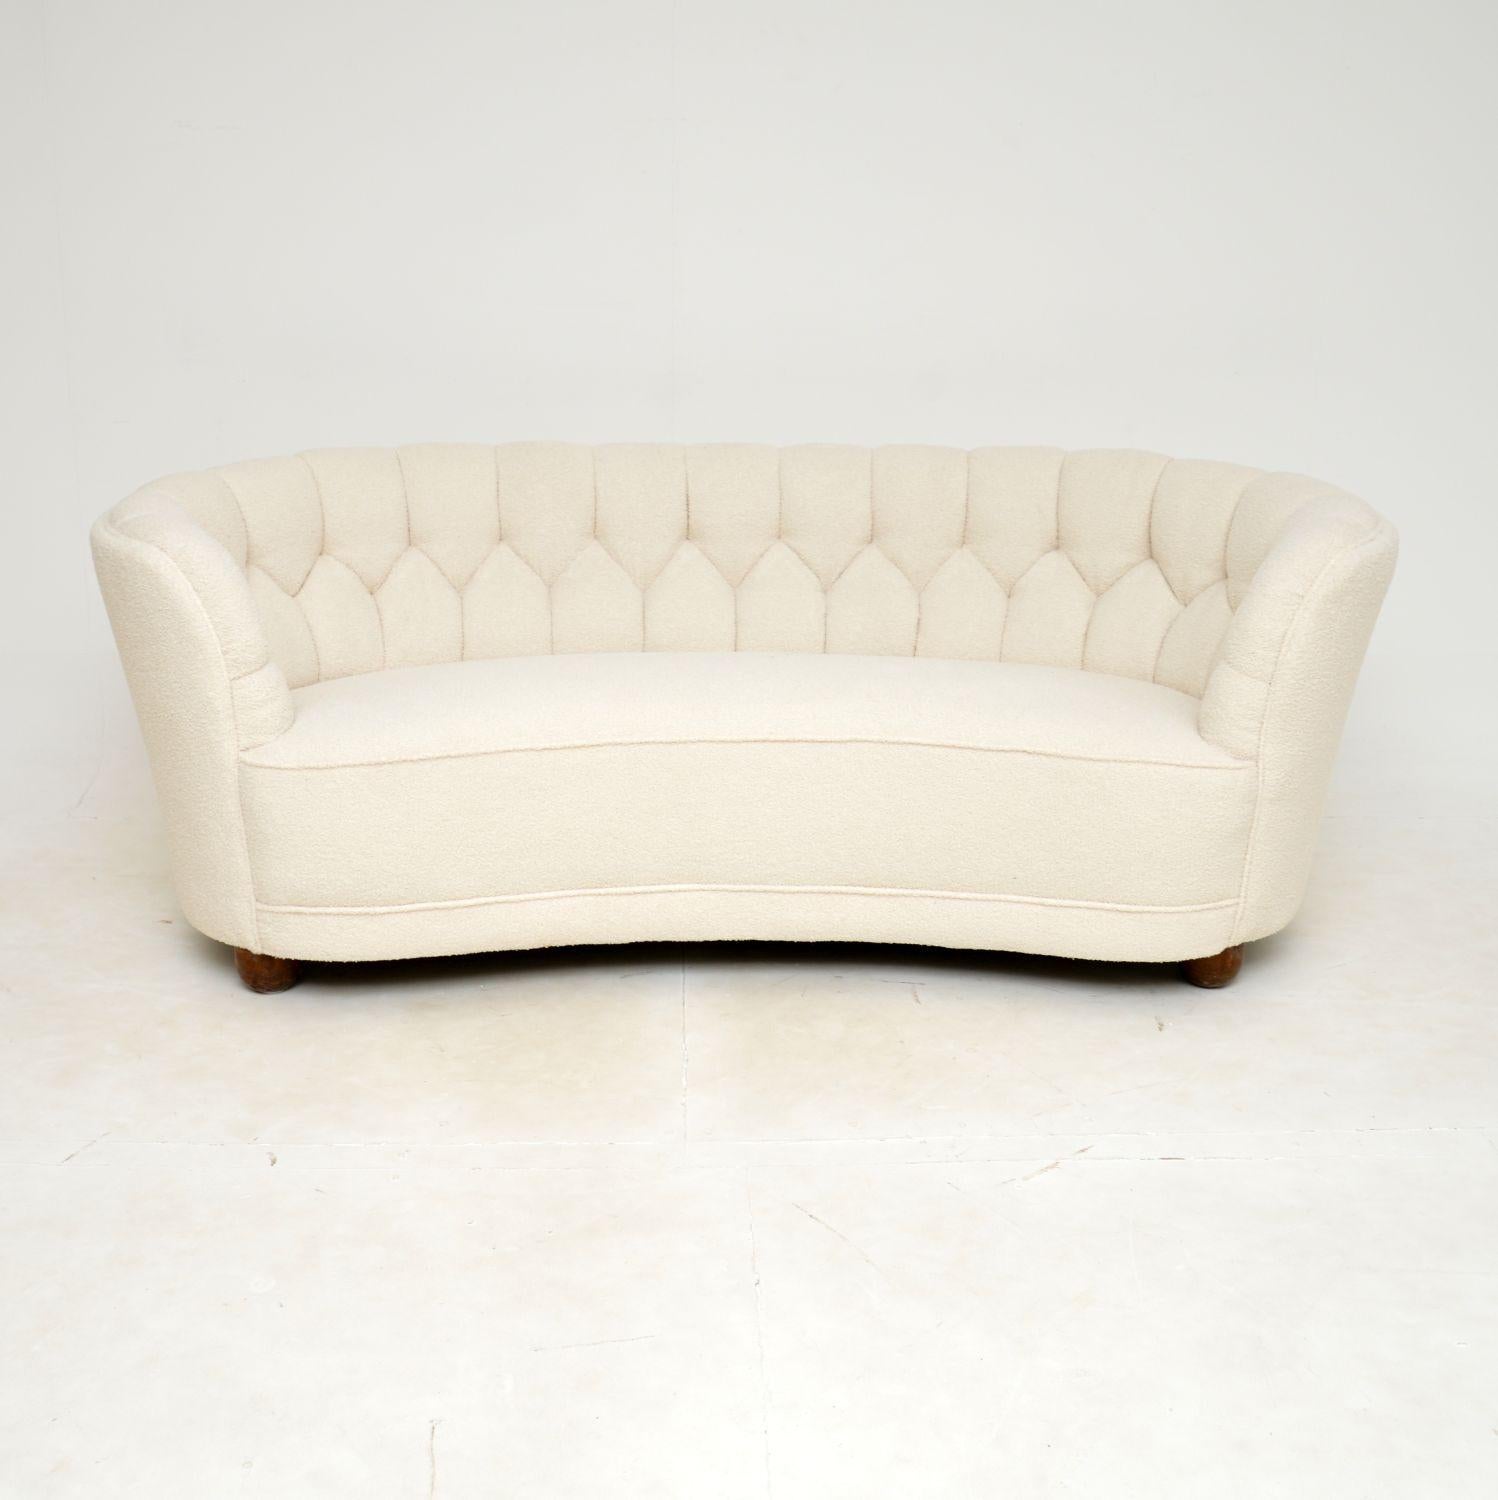 An outstanding vintage Danish curved cocktail sofa, dating from the 1940s.

This is of exceptional quality with an absolutely beautiful design. The curved frame is extremely sturdy and very heavy. It is well sprung and comfortable, it sits on solid